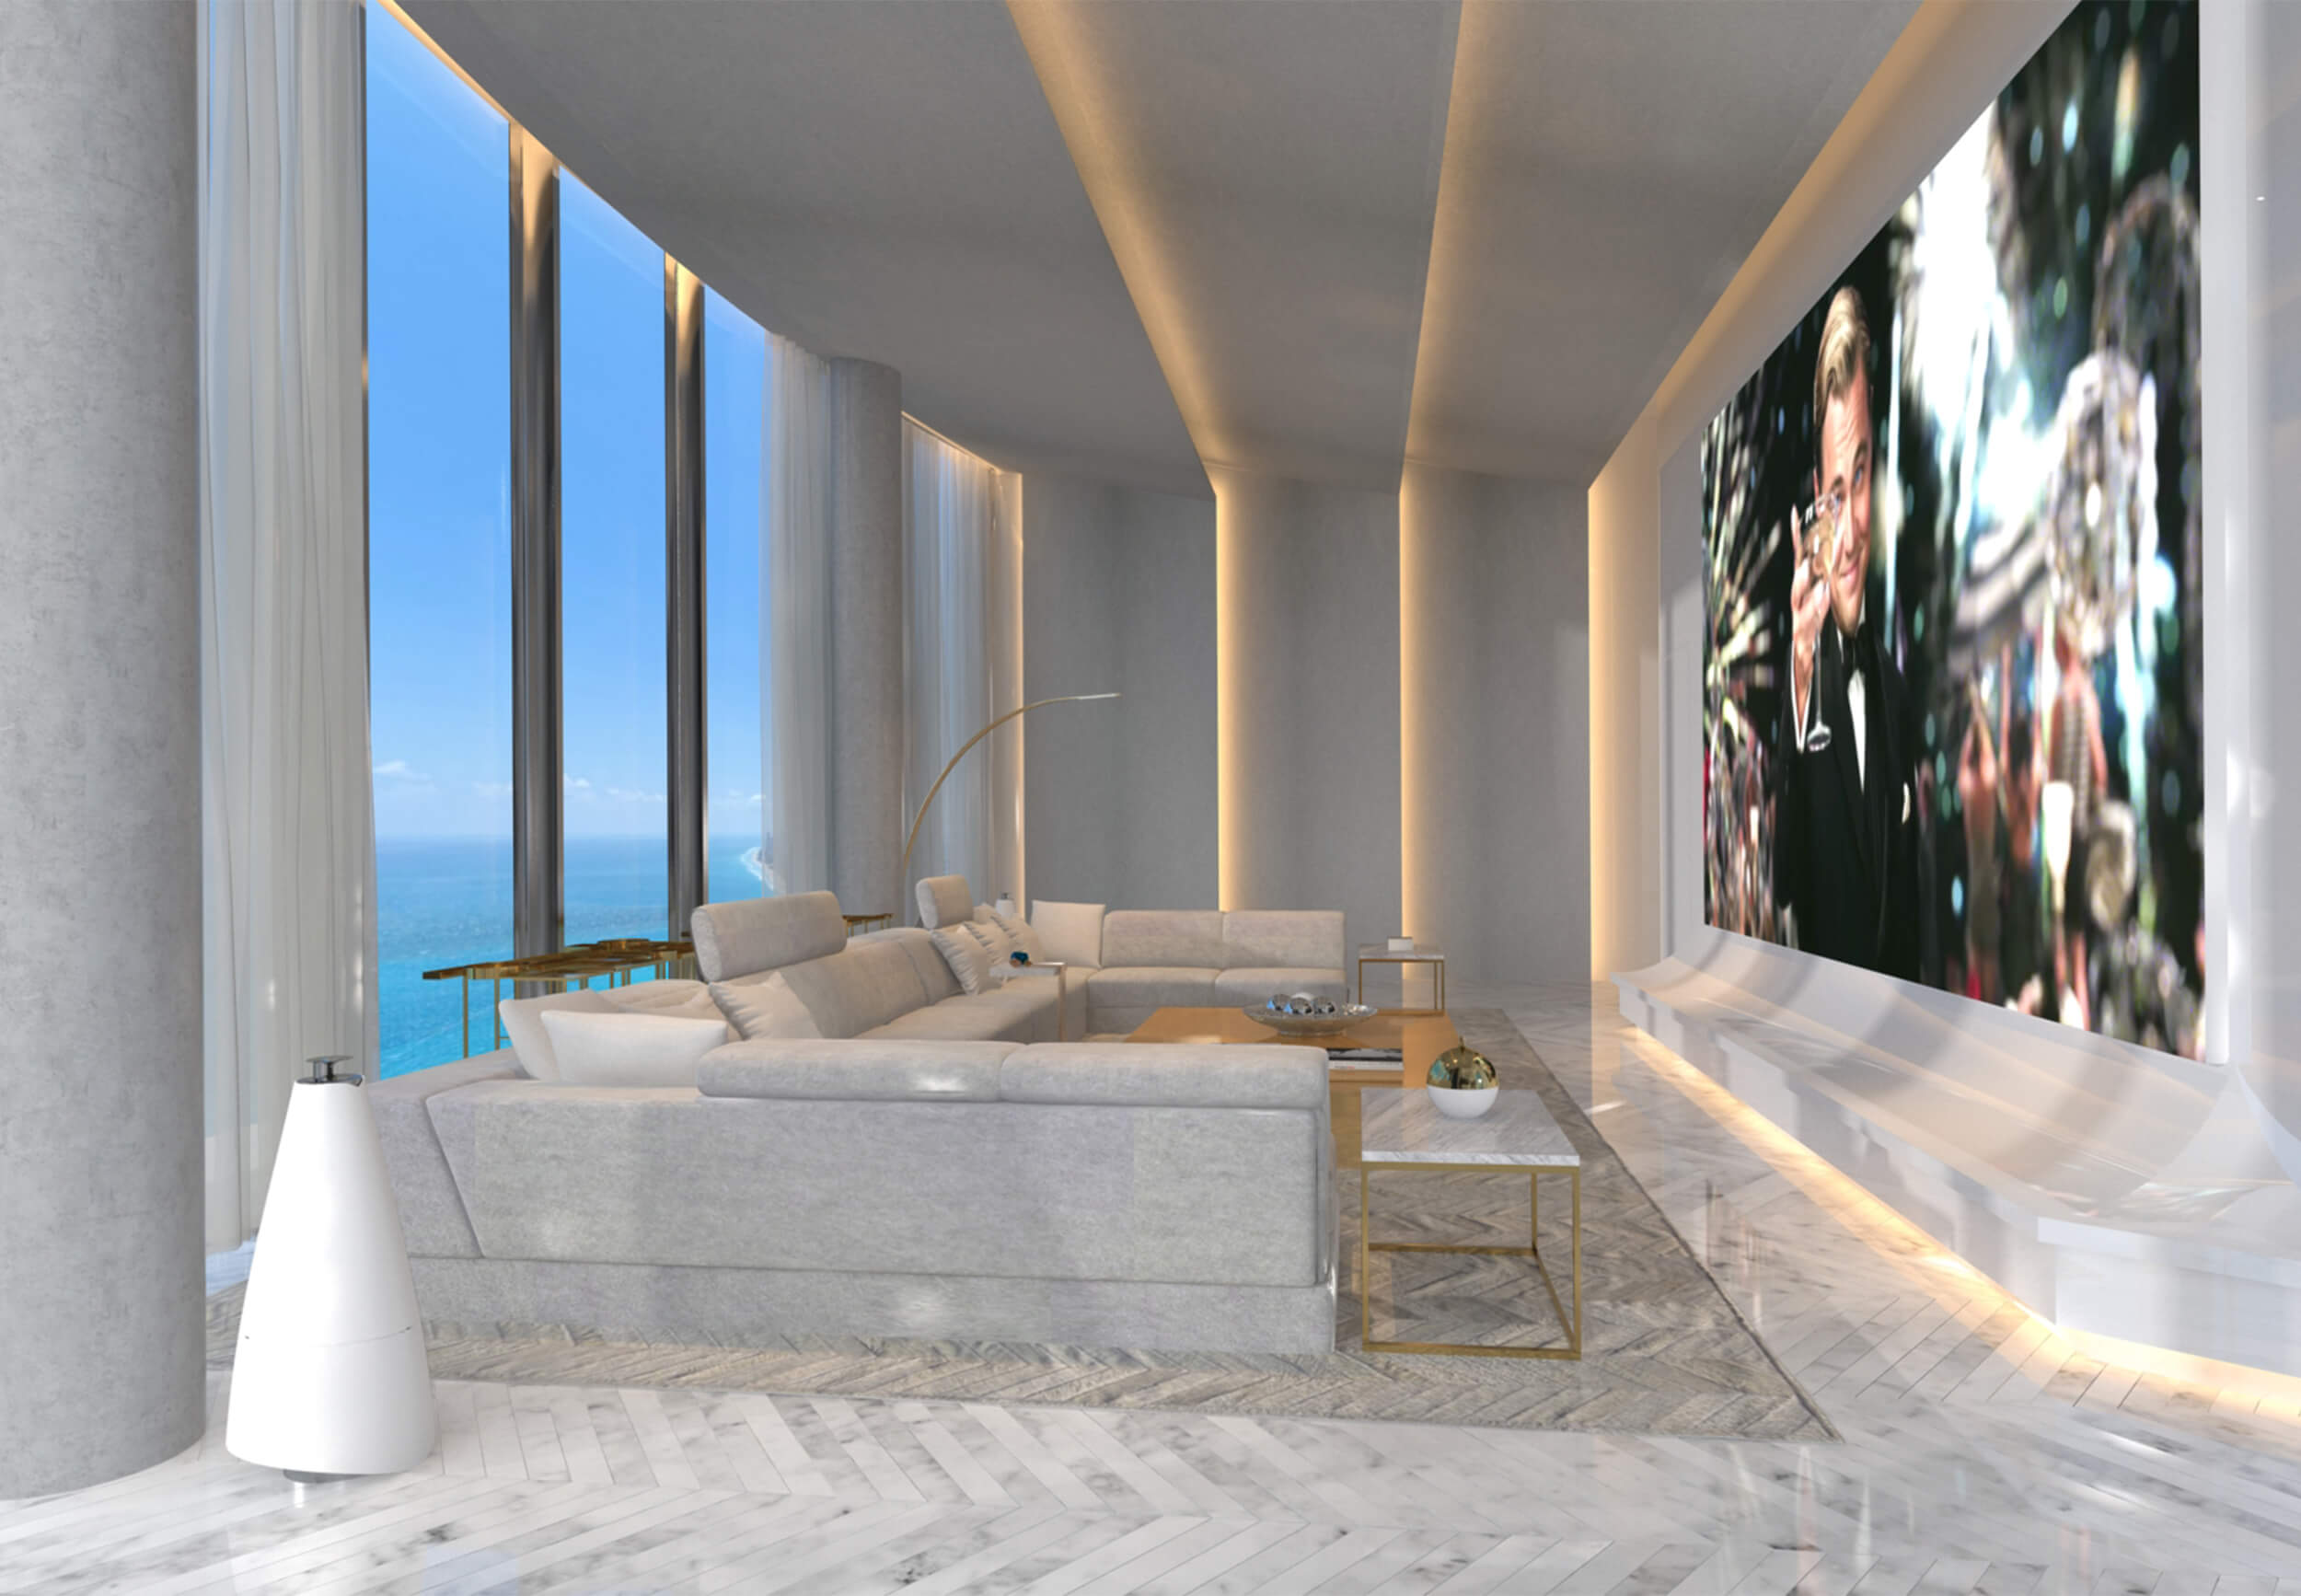 Media room design for the PH at the Ritz Carlton Residences in Sunny Isles Beach